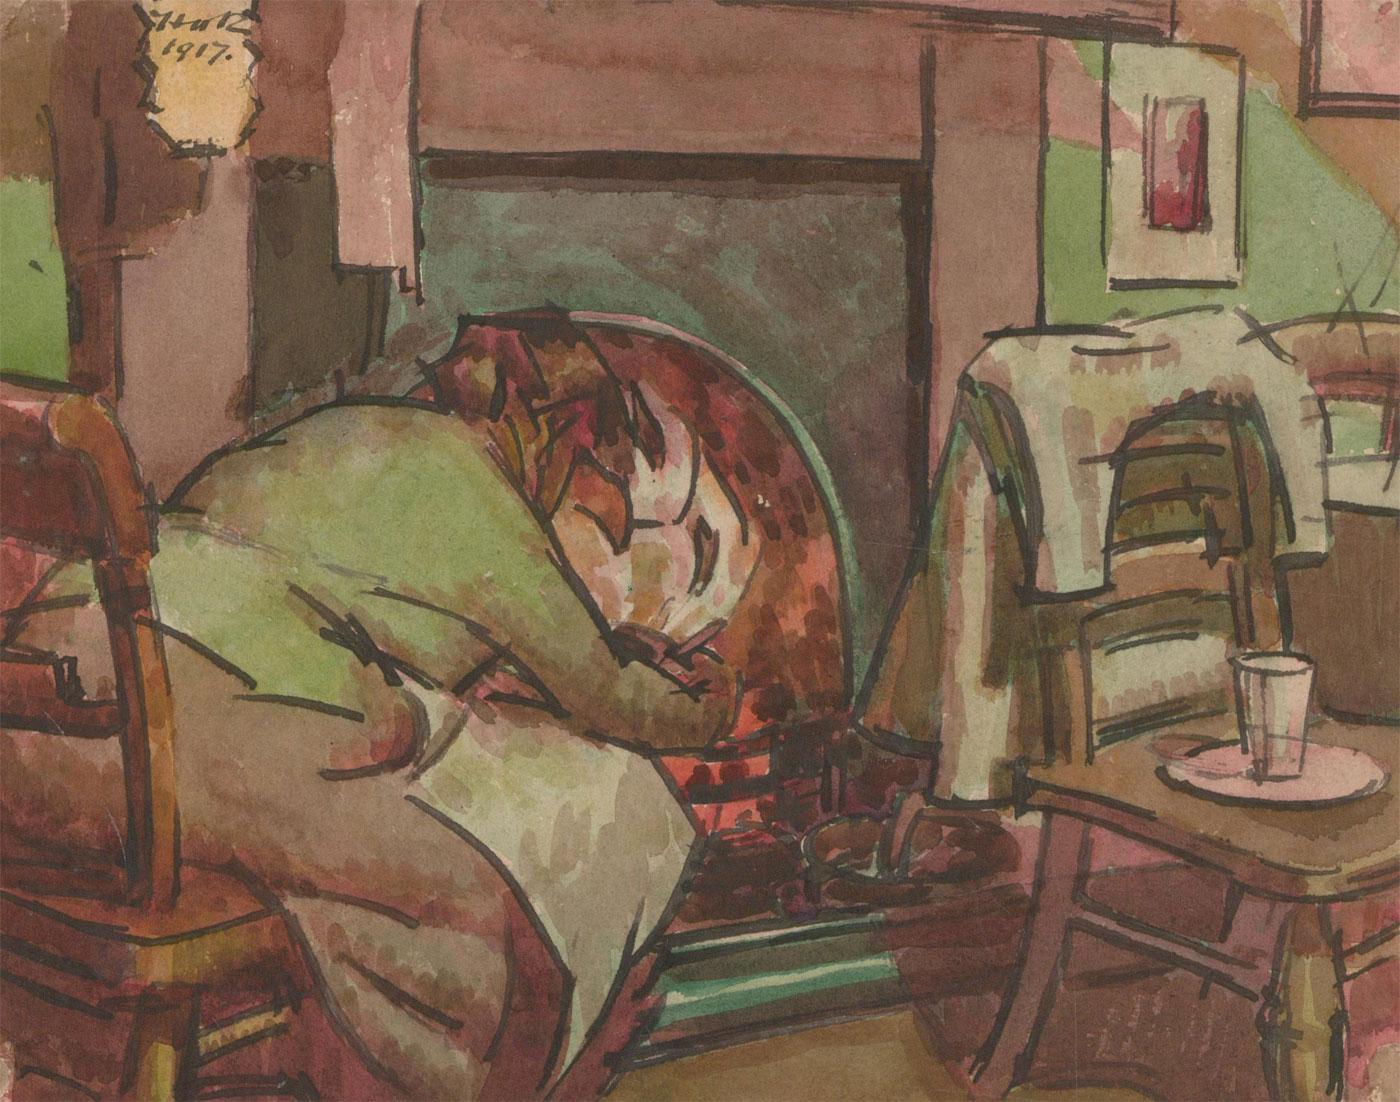 An atmospheric study of the artist's lover Hilda stoking a burning fire. The warm colour palette and vivid contrast between the green and purple tones gives this piece a wonderful intimacy. This artwork is definitely more personal, with a